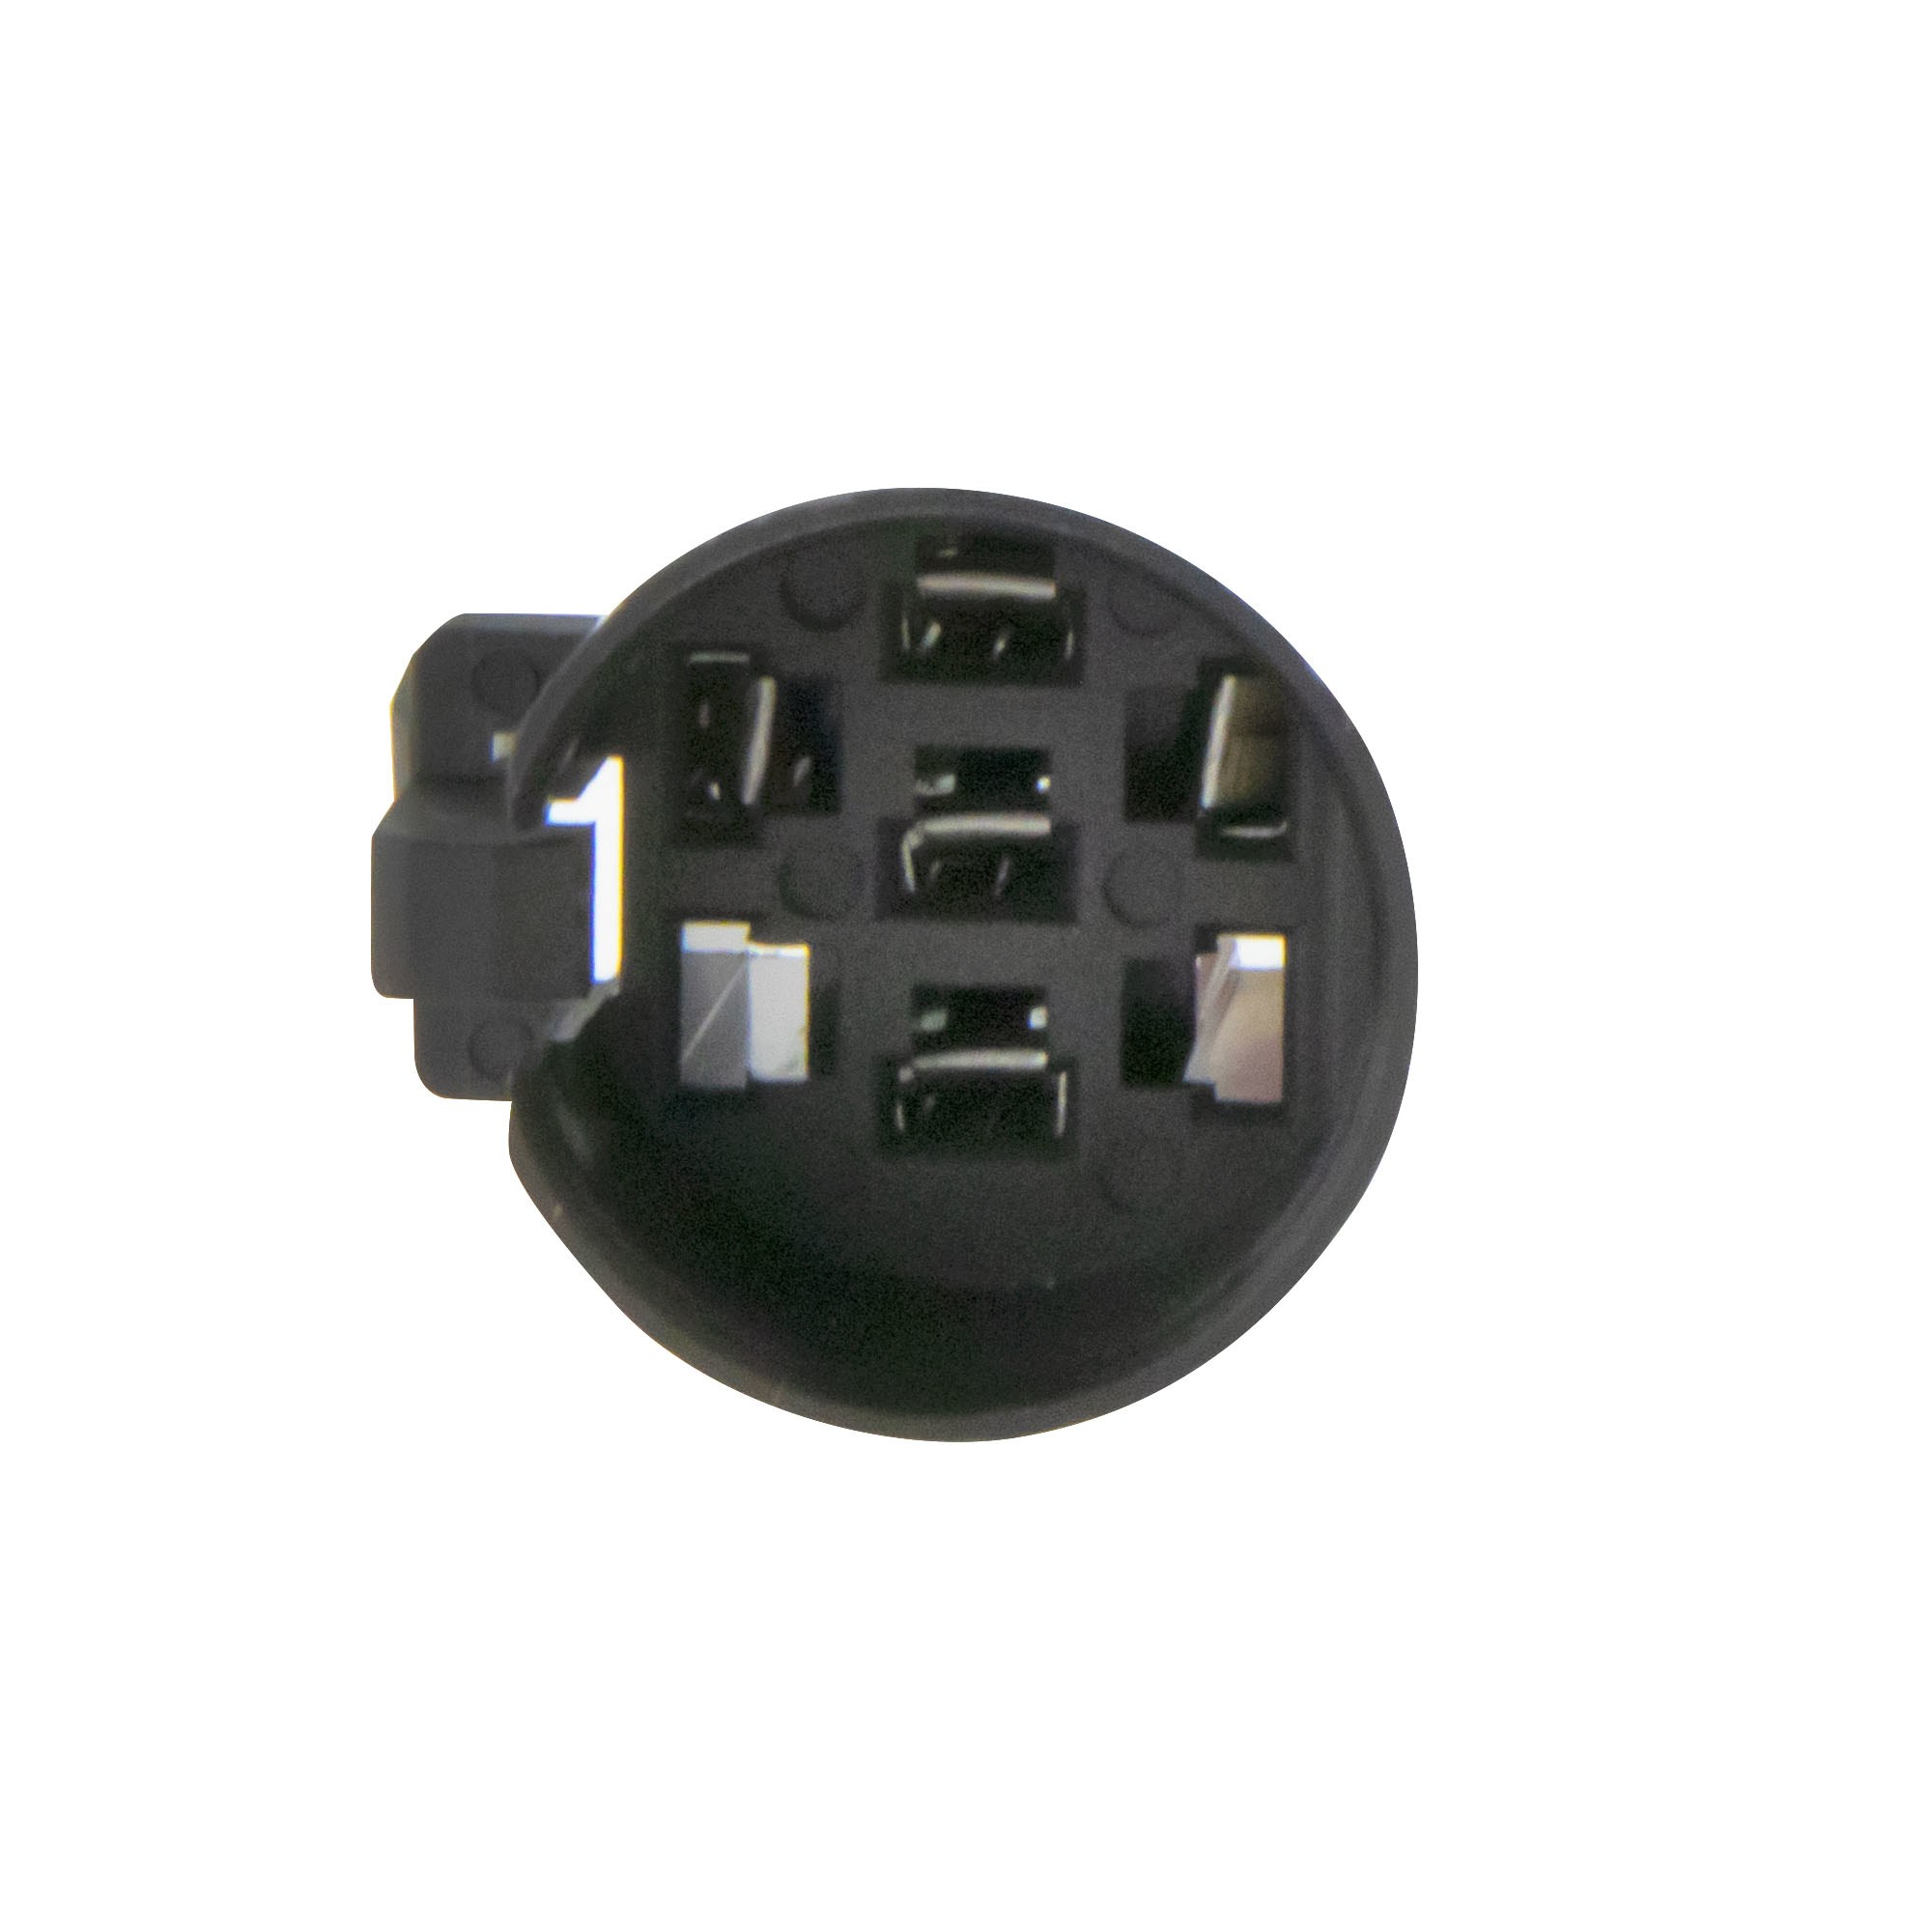 Plug-in connector for Ø19mm Push-button